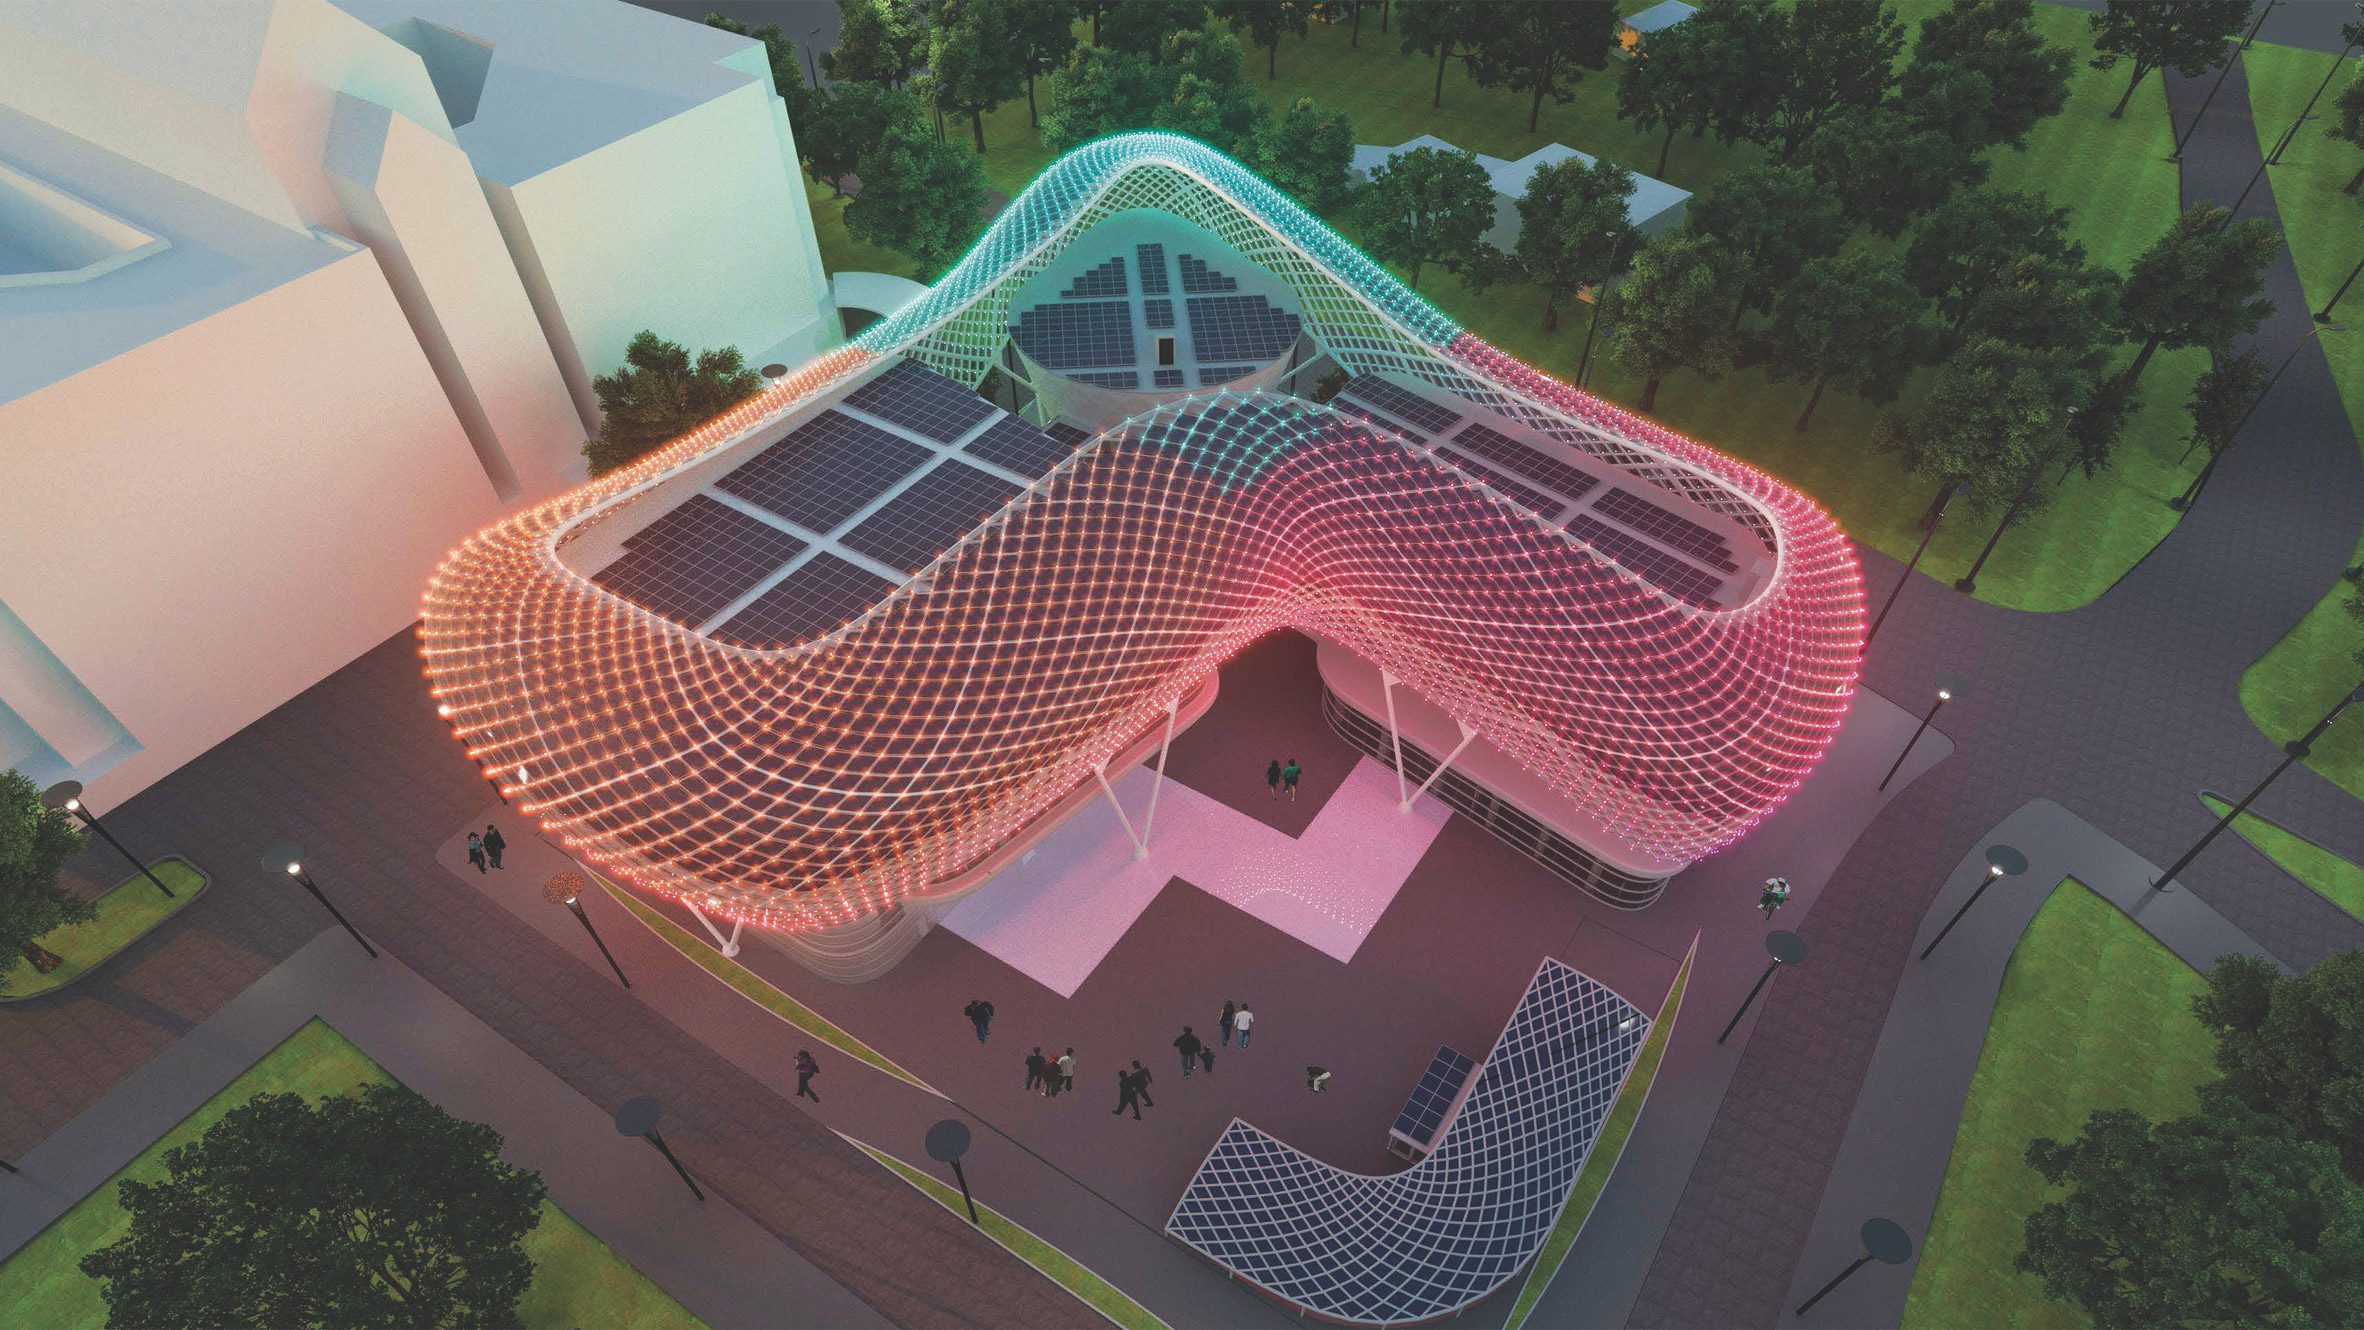 Render of a sinuous multi-coloured building in a parking lot